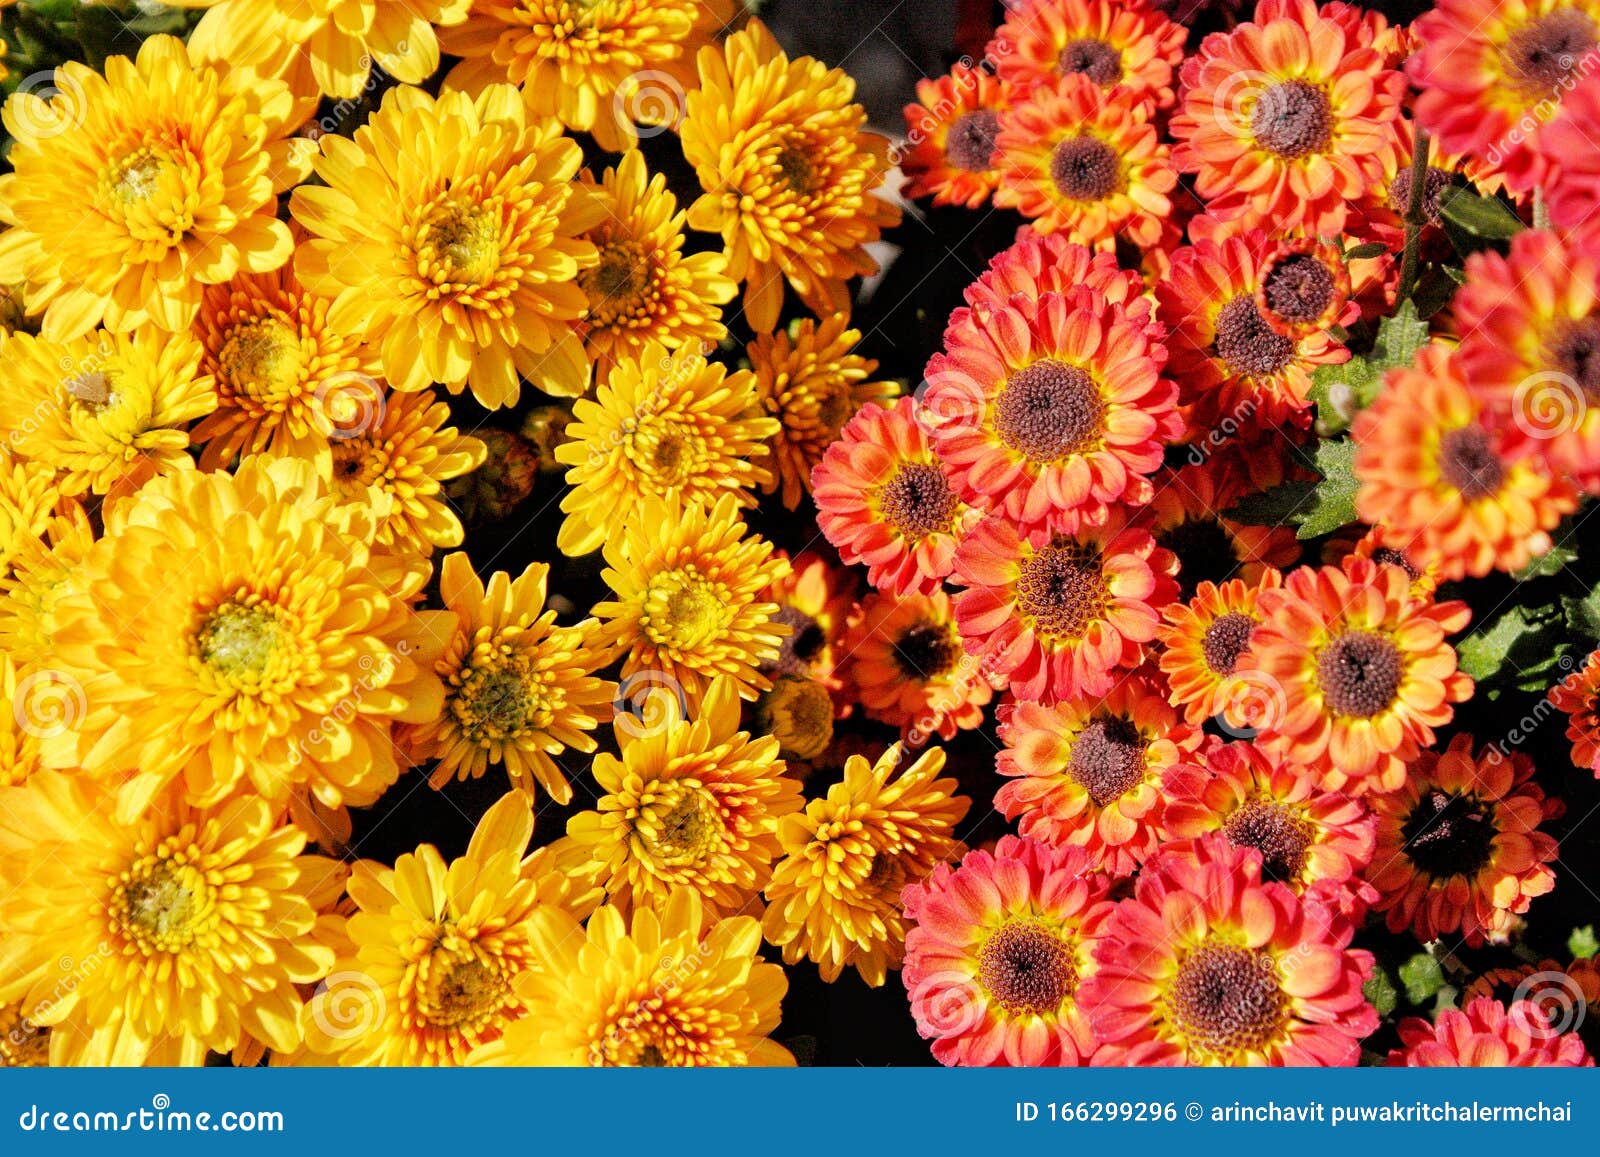 The Yellow And Orange Color Chrysanthemum Flowers ...